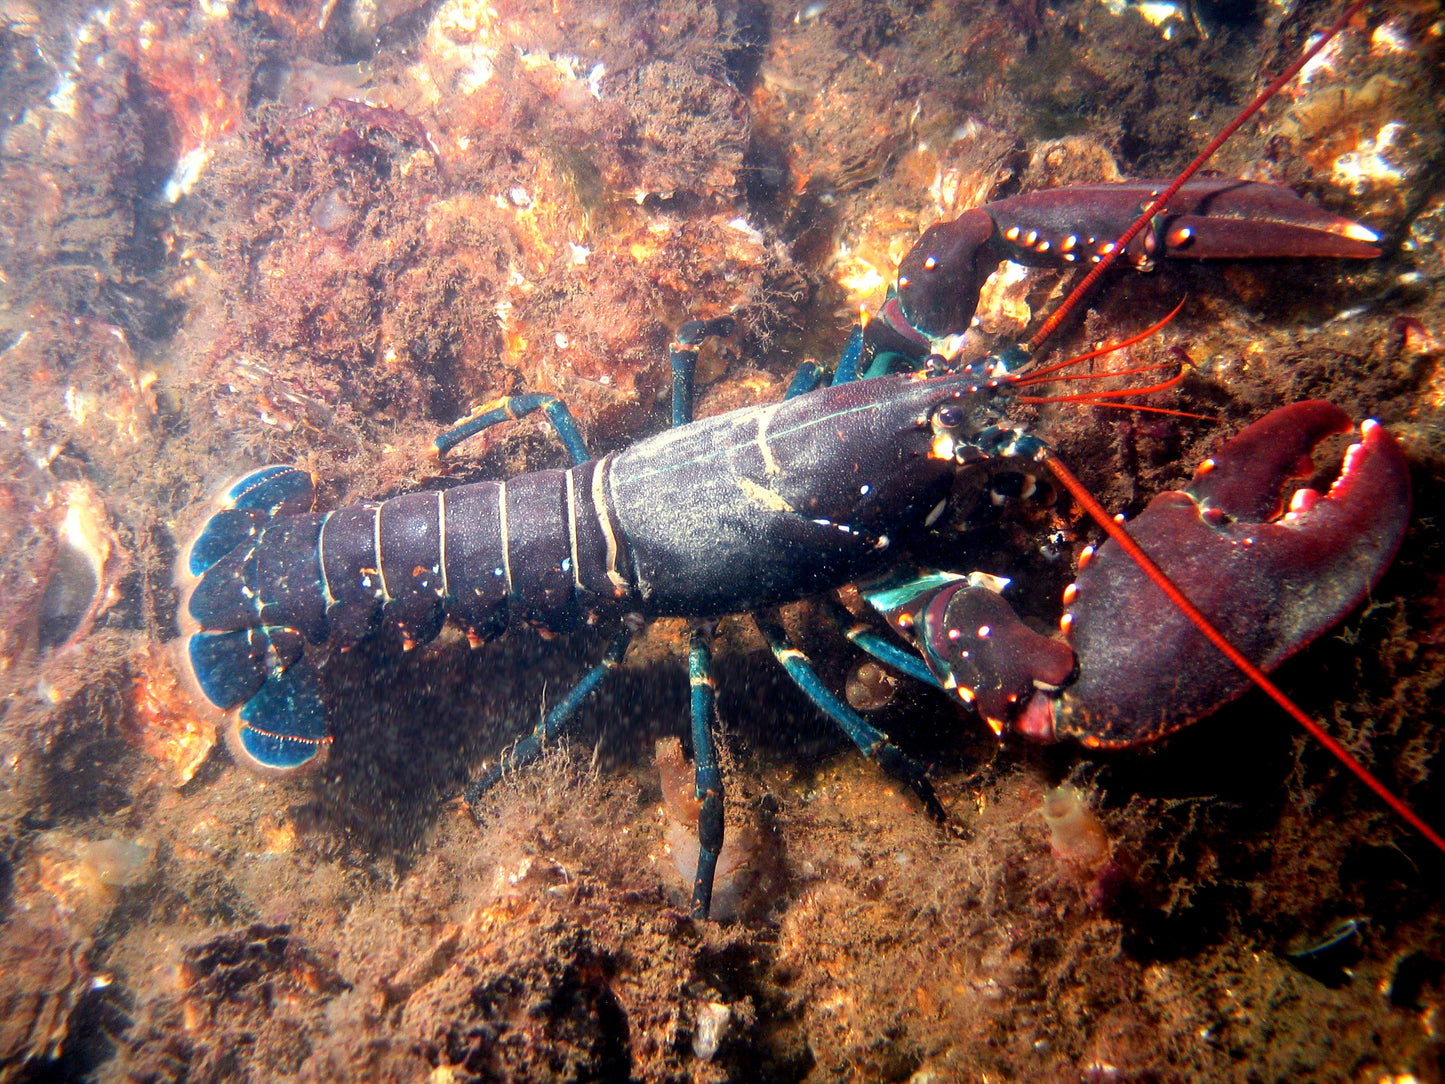 EUROPEAN LOBSTER GLOSSY POSTER PICTURE PHOTO PRINT BANNER fish ocean cool